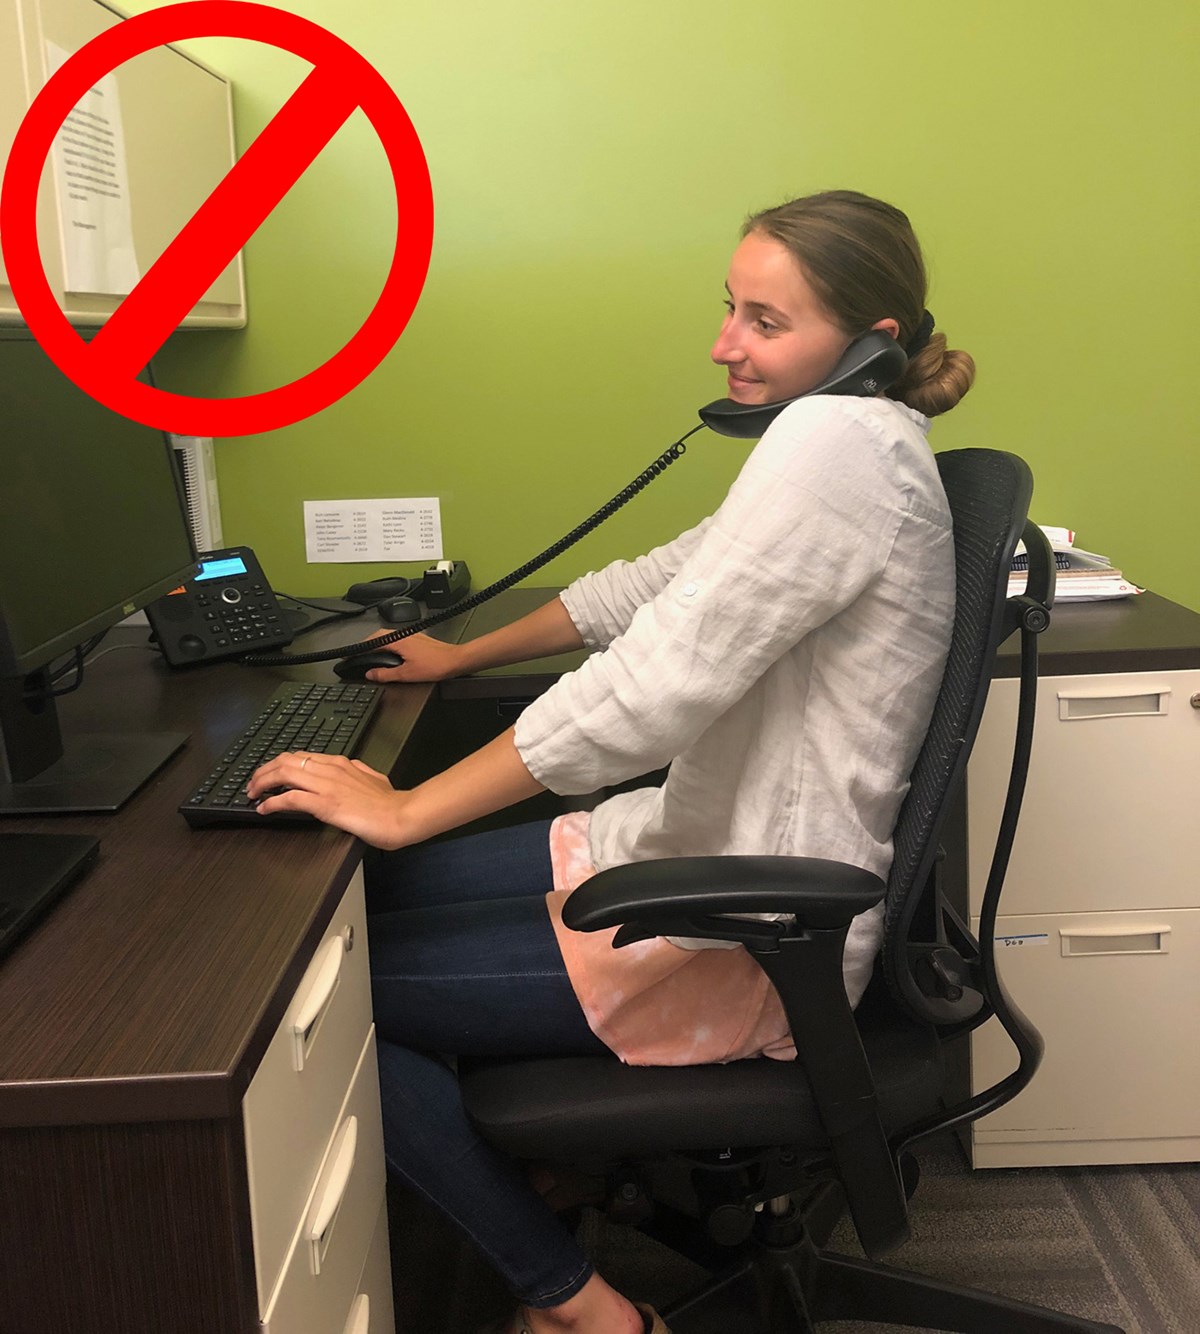 A no sign over an image of a woman sitting at her desk while using the phone. The phone is being held between her shoulder and ear.